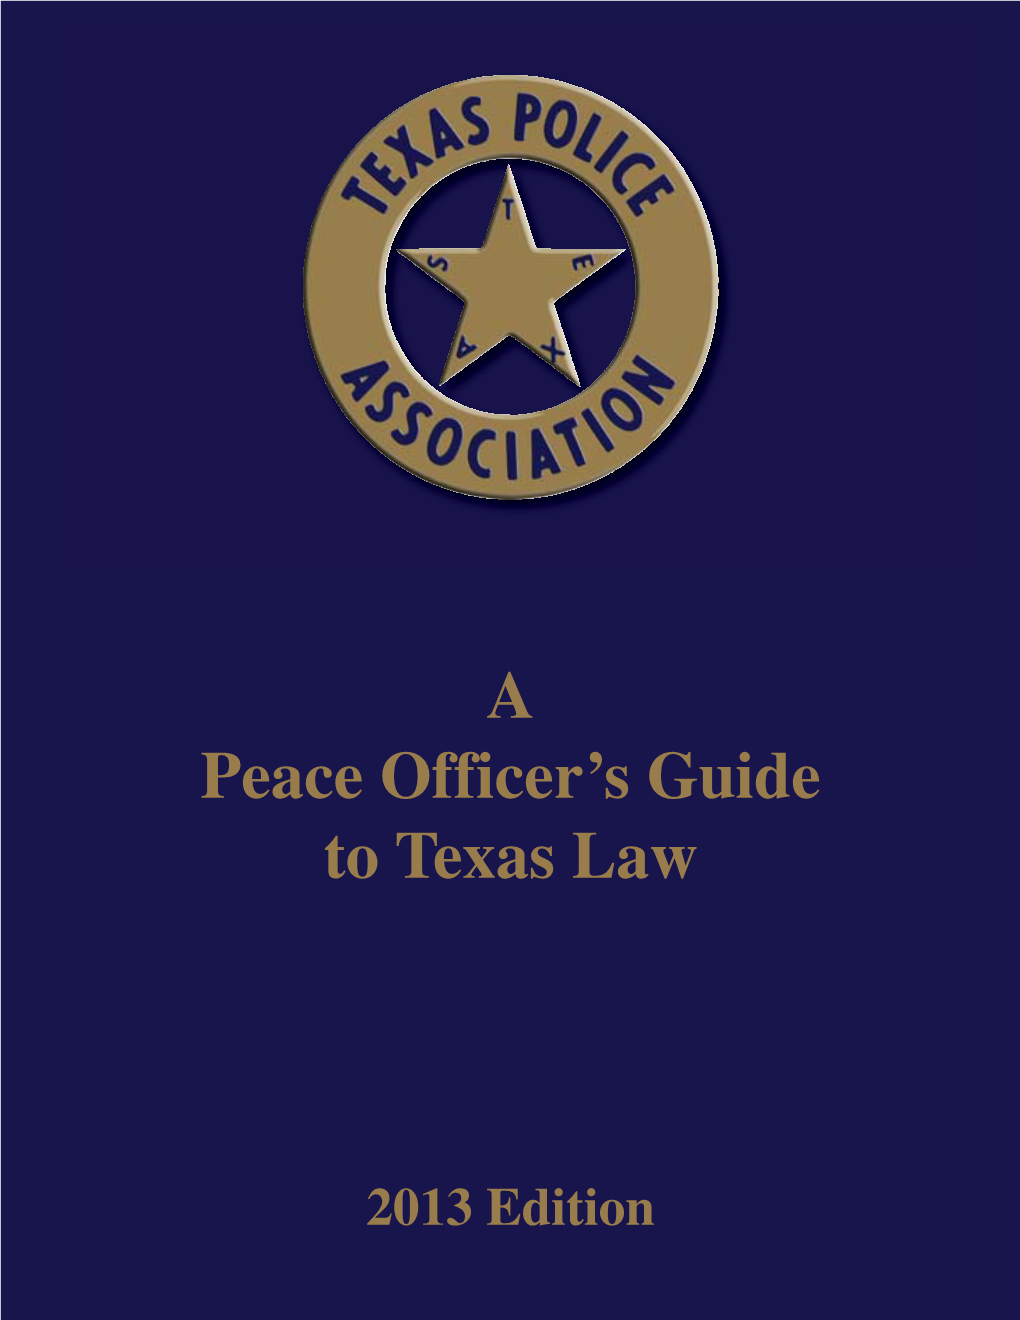 A Peace Officer's Guide to Texas Law, and Is Being Provided to Members of the Texas Police Association As a Benefit of Membership